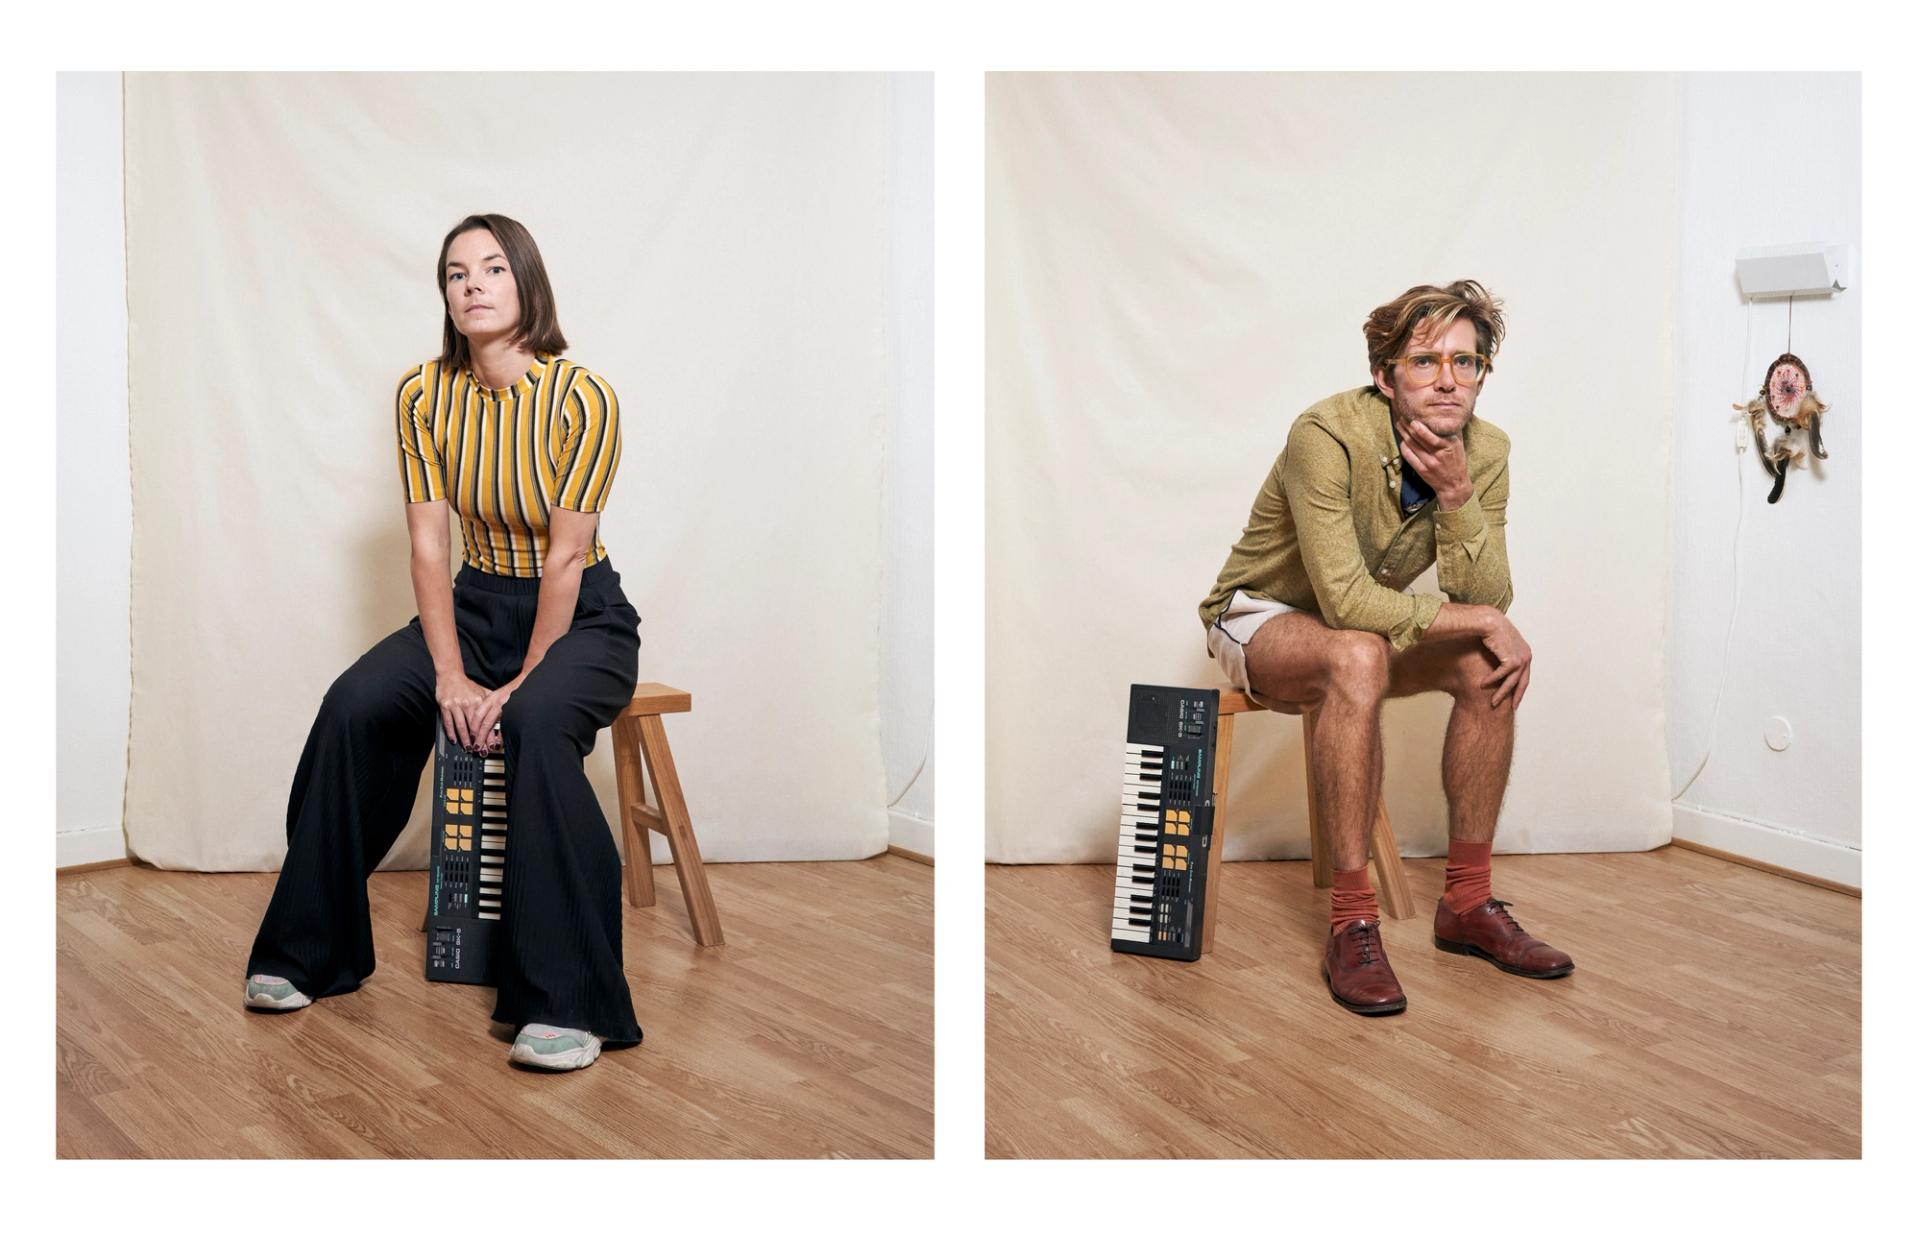 Ingrid and Lasse are sitting on a wooden stool, each with a casio-keyboard, in a white room in front of an off-white canvas. They look straight in the camera.